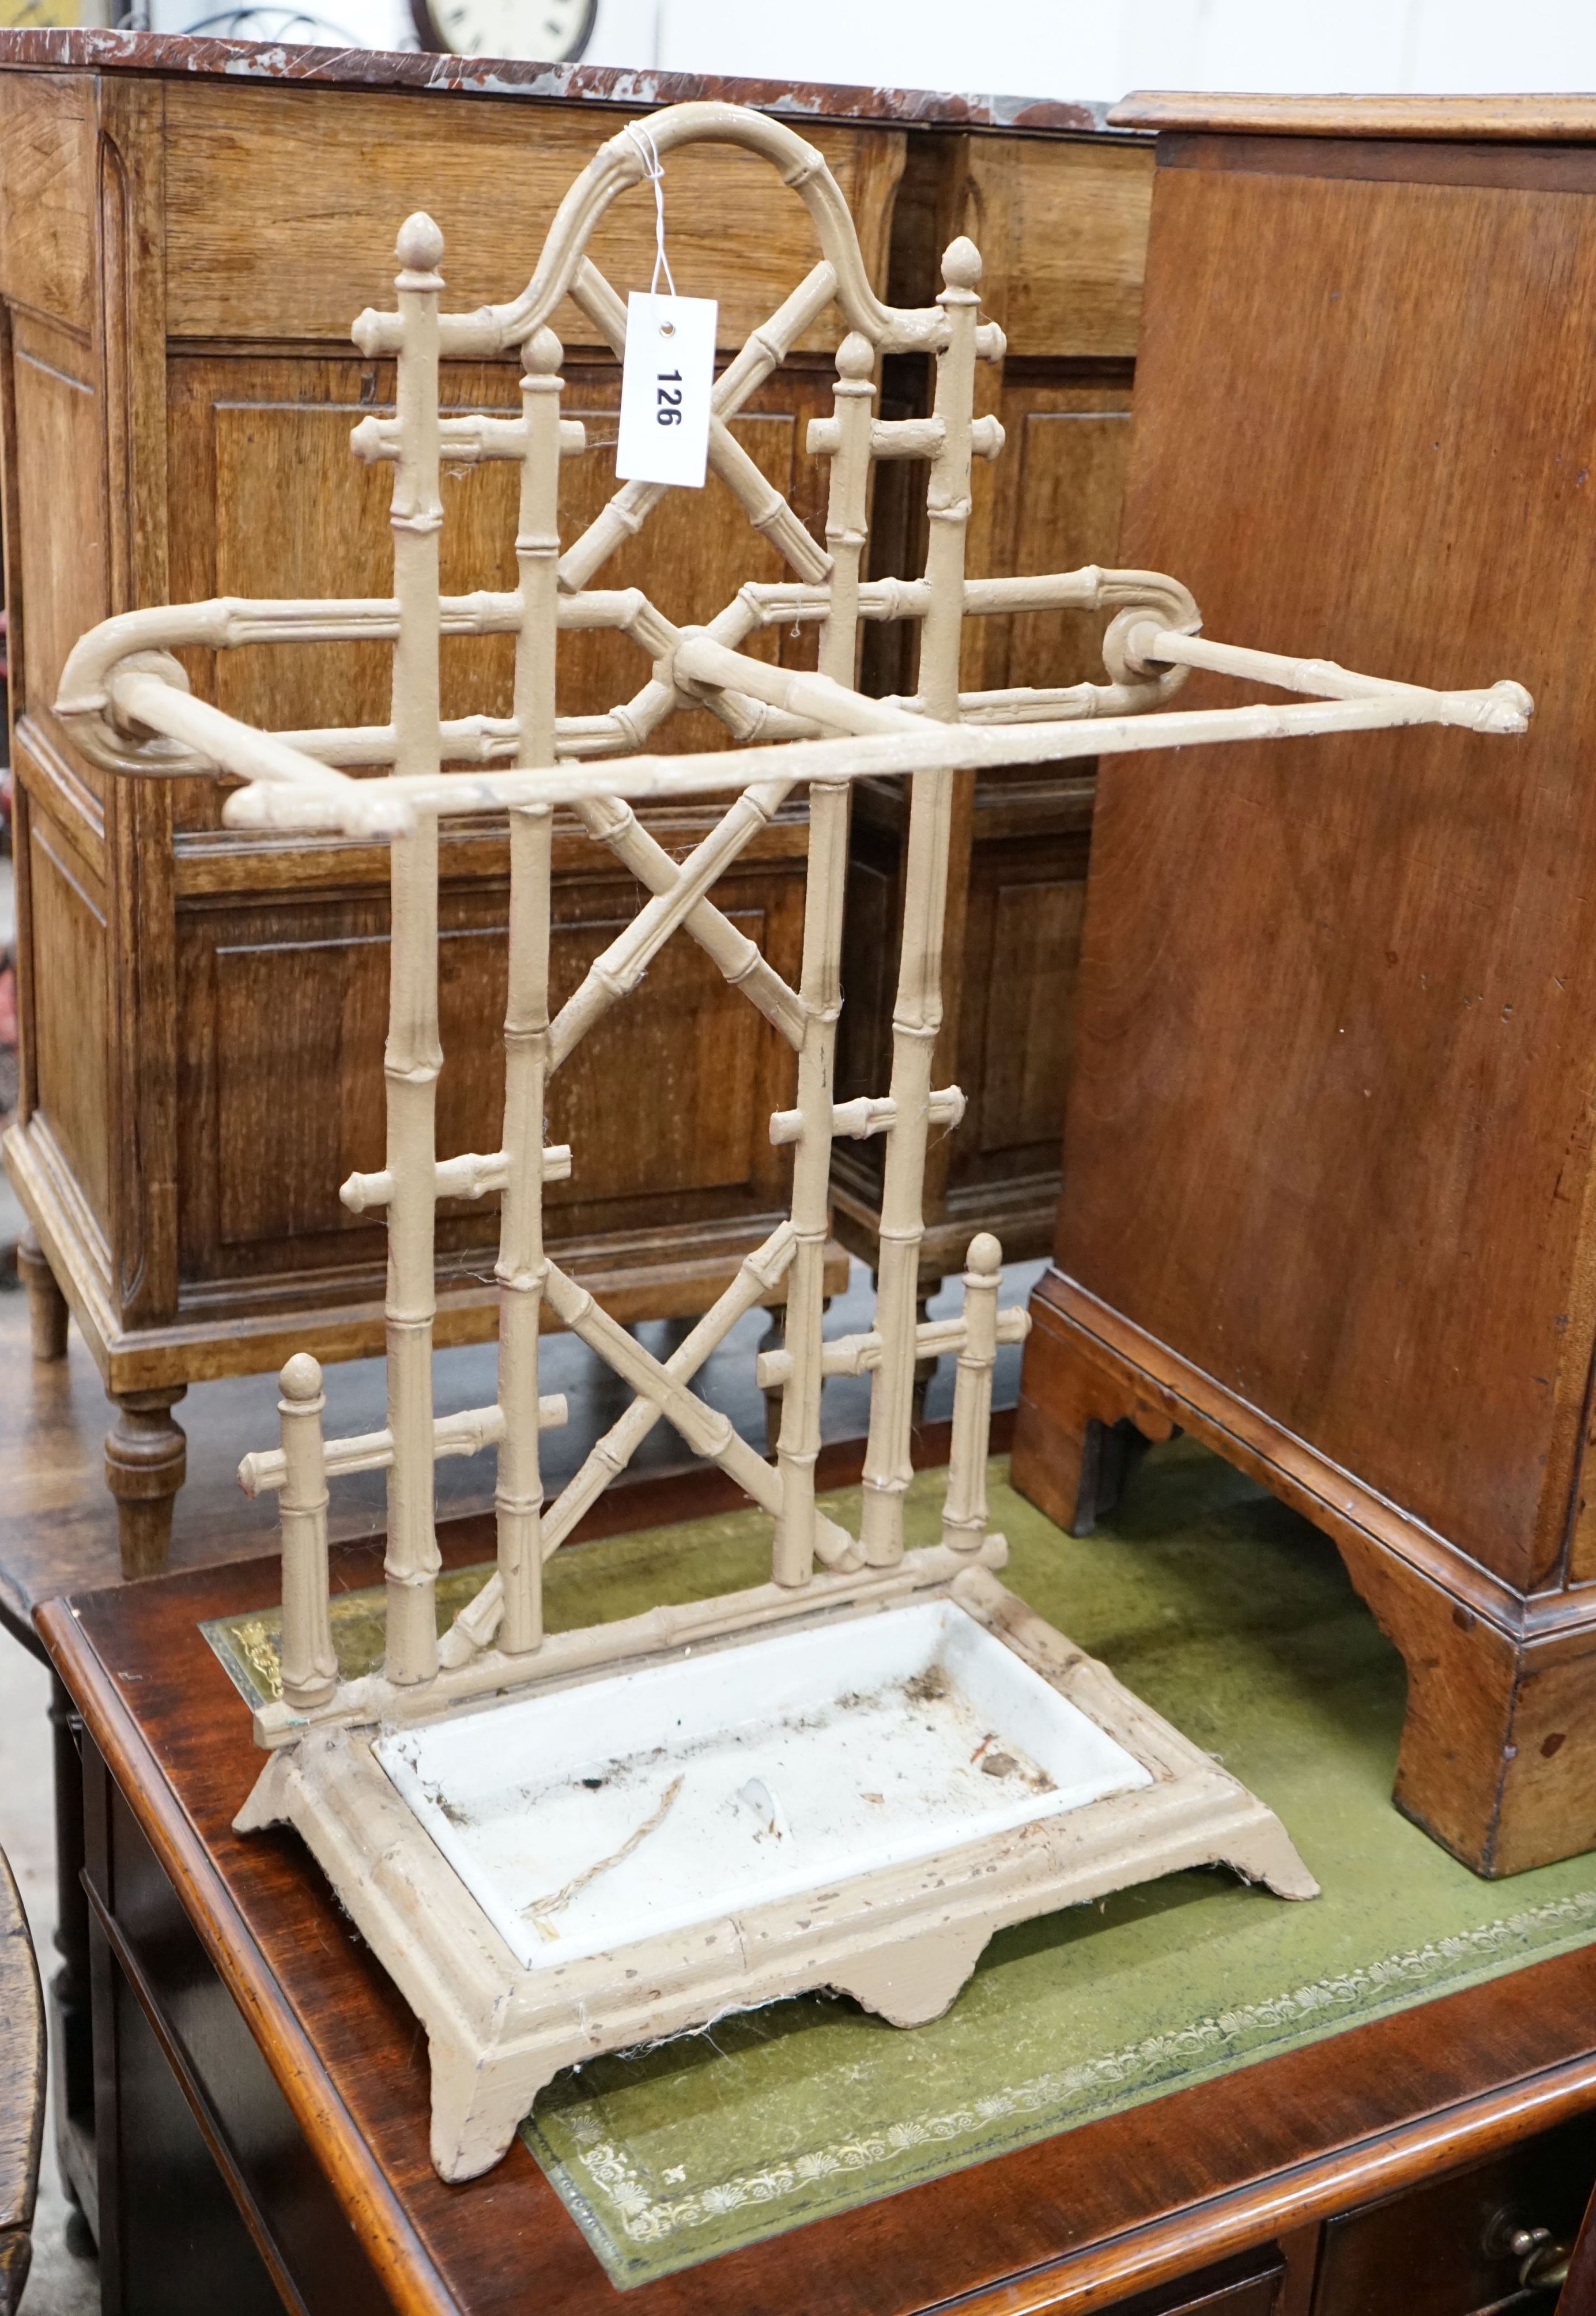 A Victorian style painted metal faux bamboo stick stand, width 52cm, height 70cm